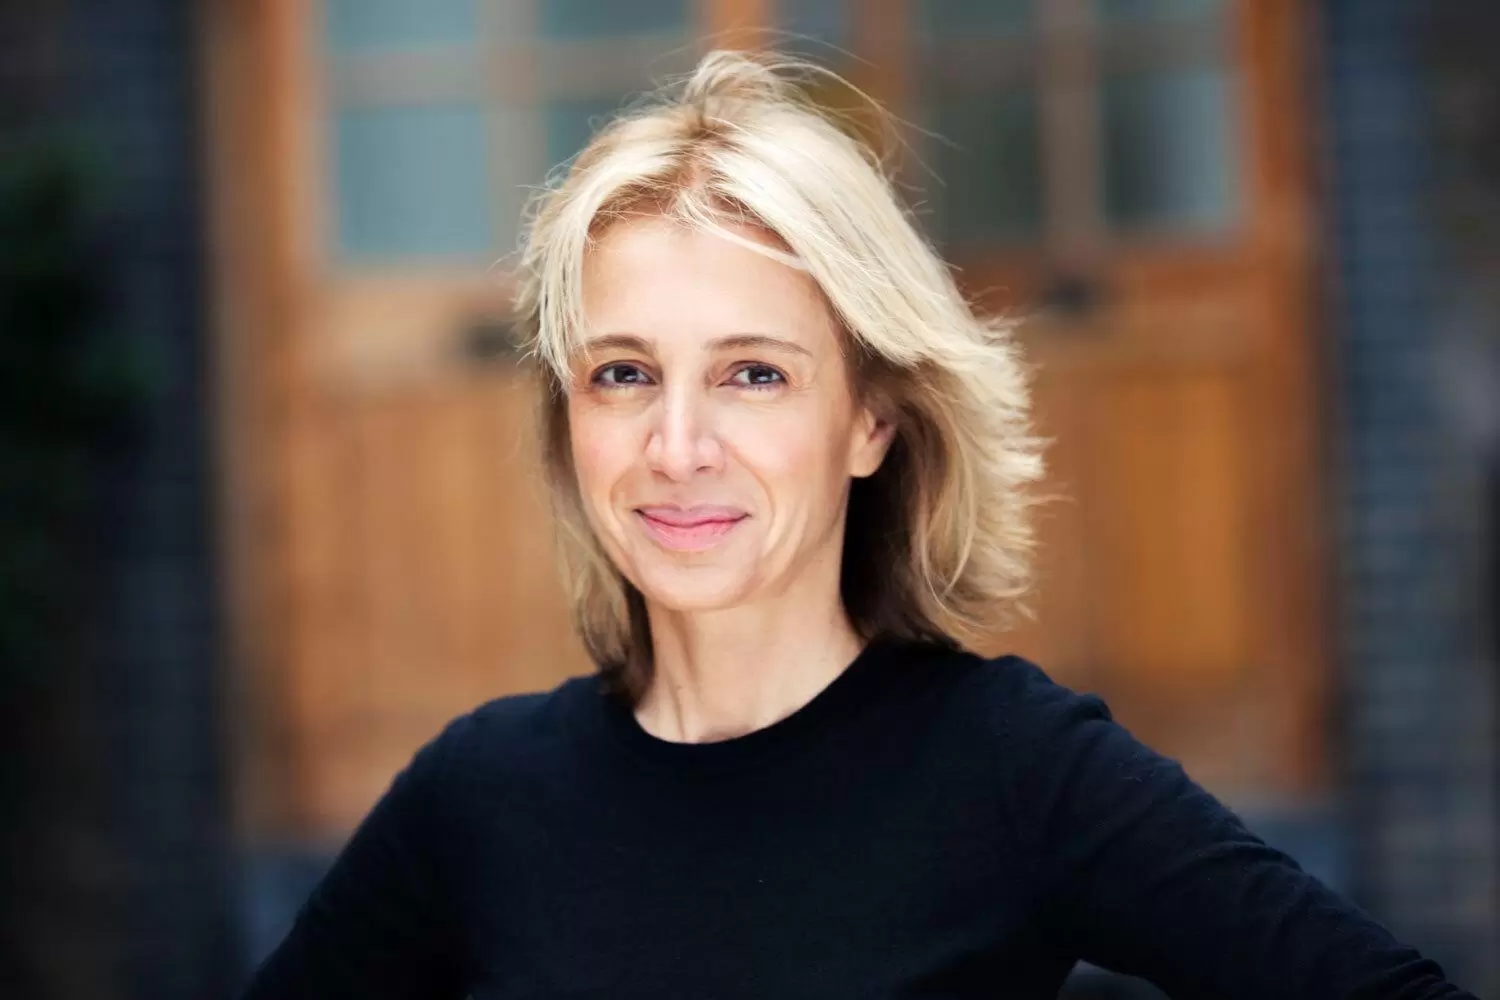 Sahar Hashemi, co-founder of Coffee Republic, smiling at the camera in a black top.